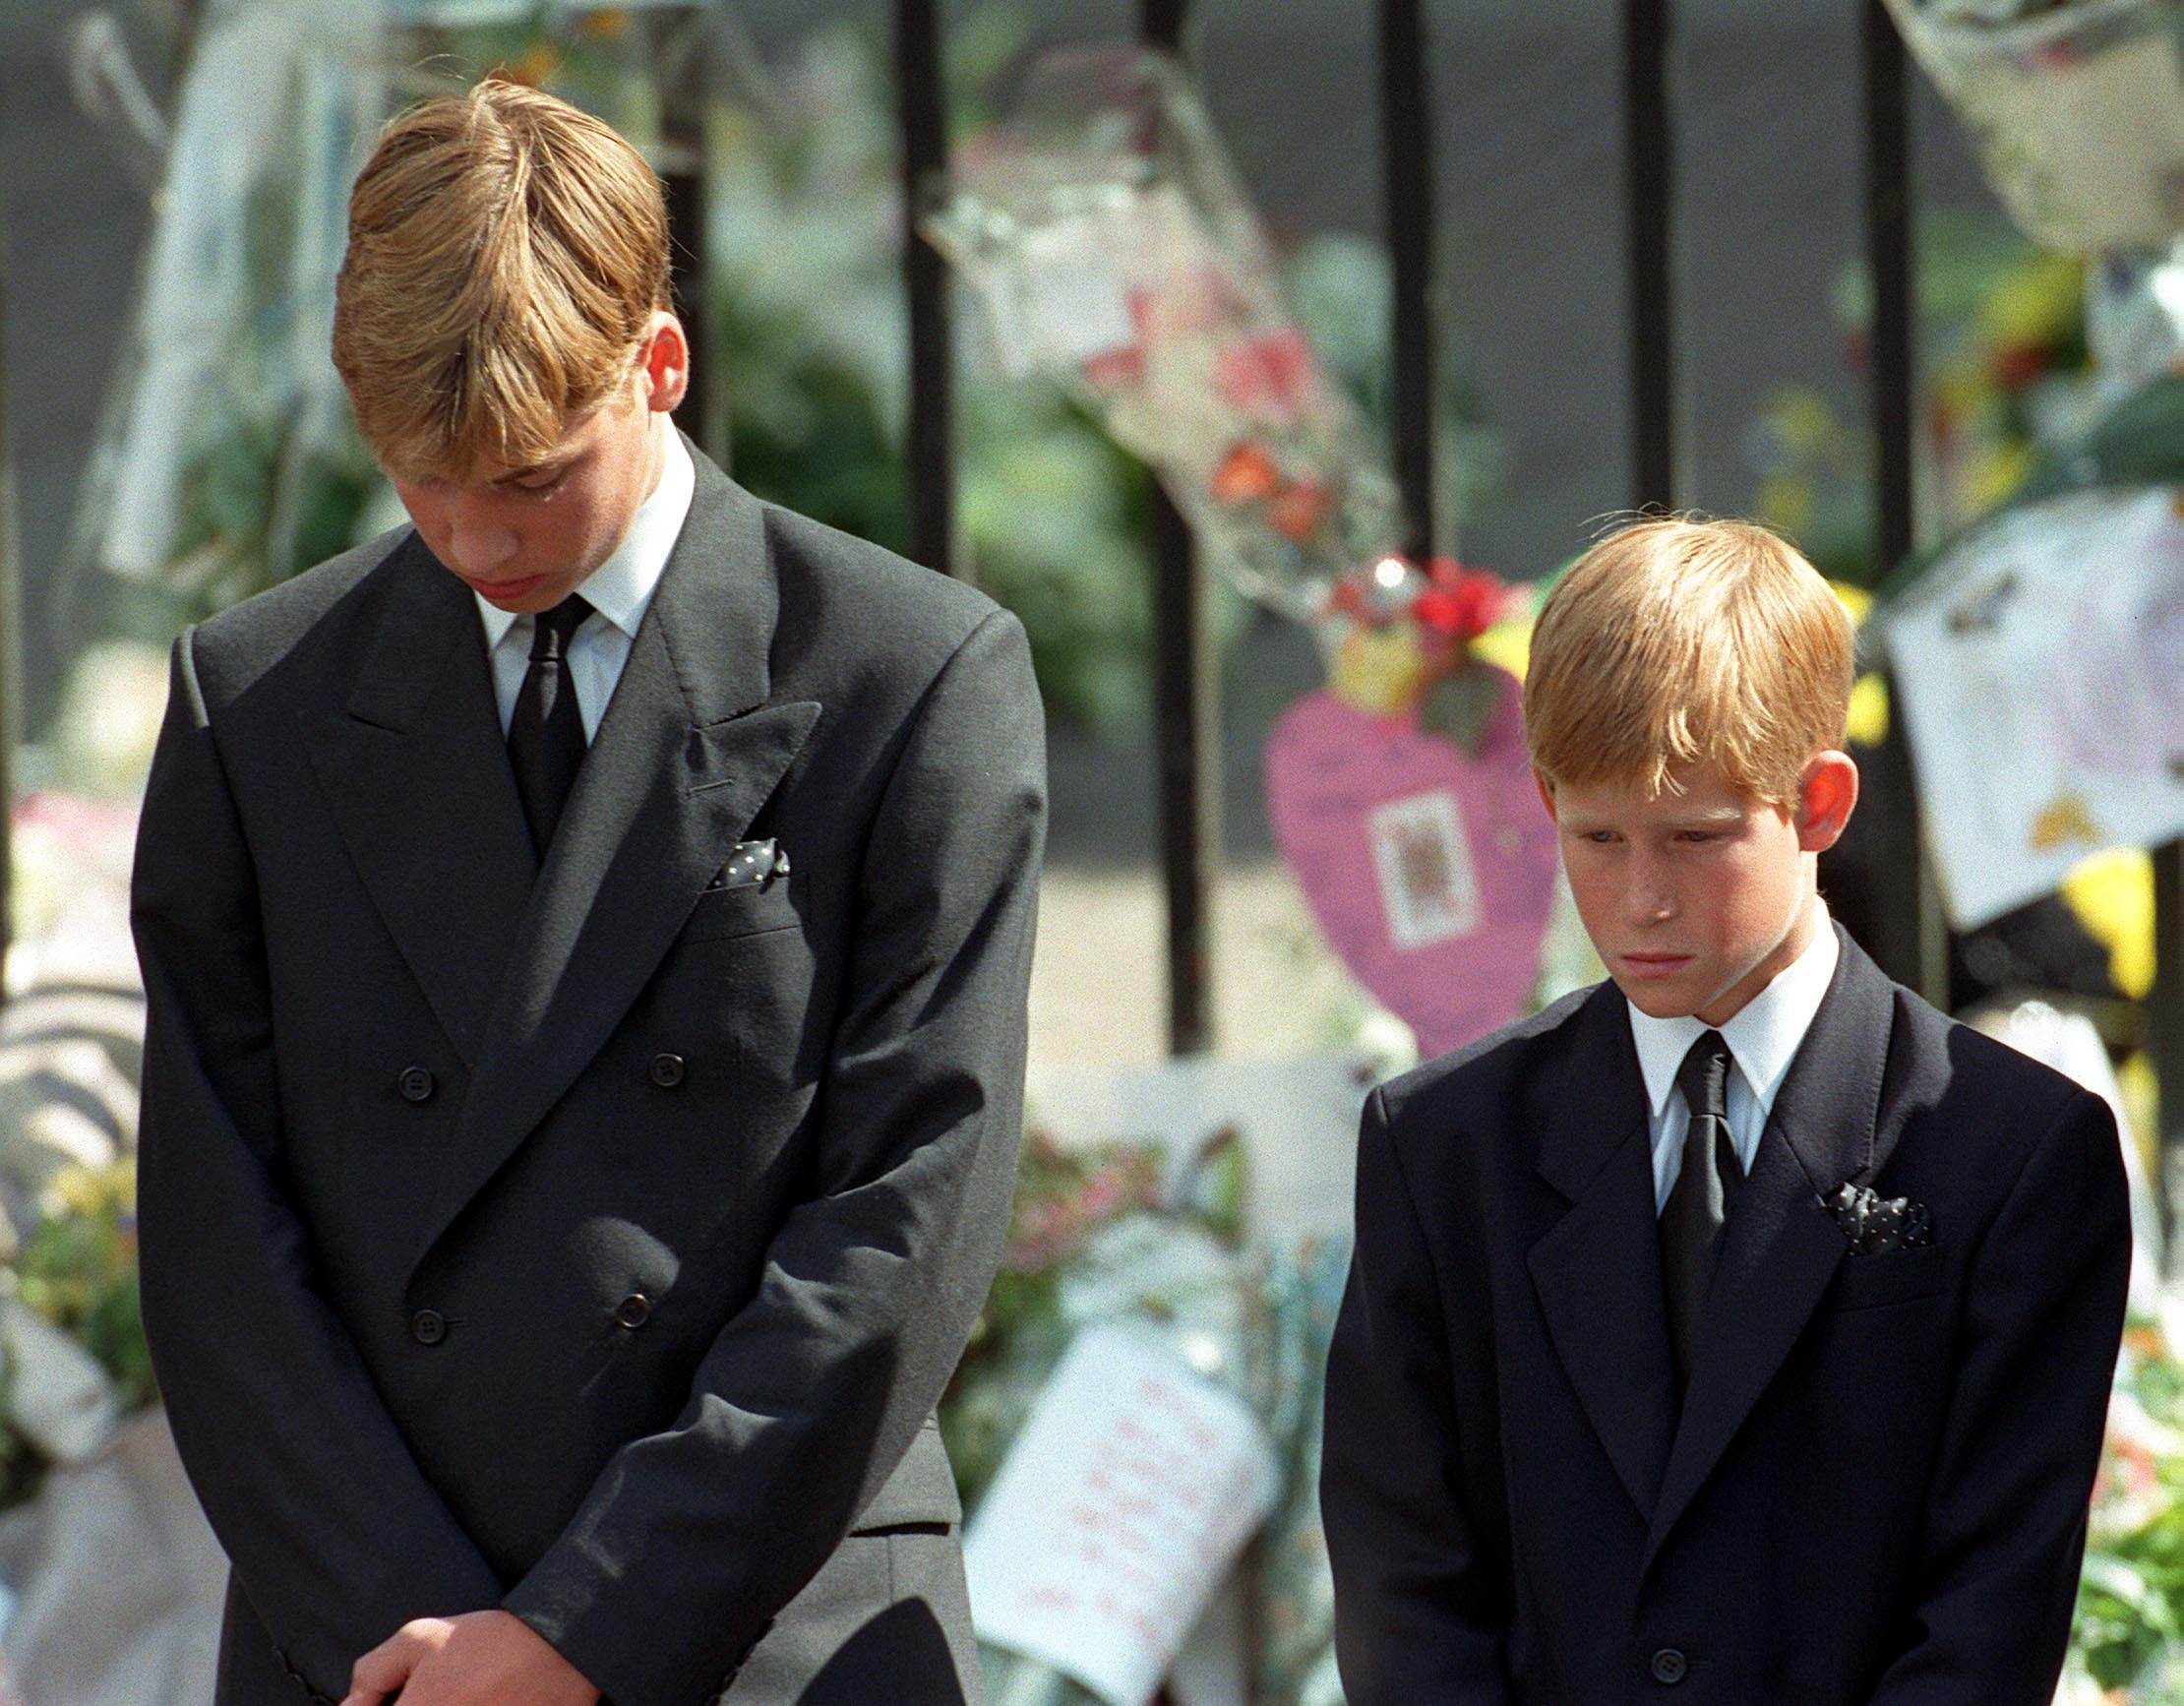 Prince William And Prince Harry Holding A Funeral Programme At Westminster Abbey For The Funeral Of Diana, Princess Of Wales | Source: Getty Images